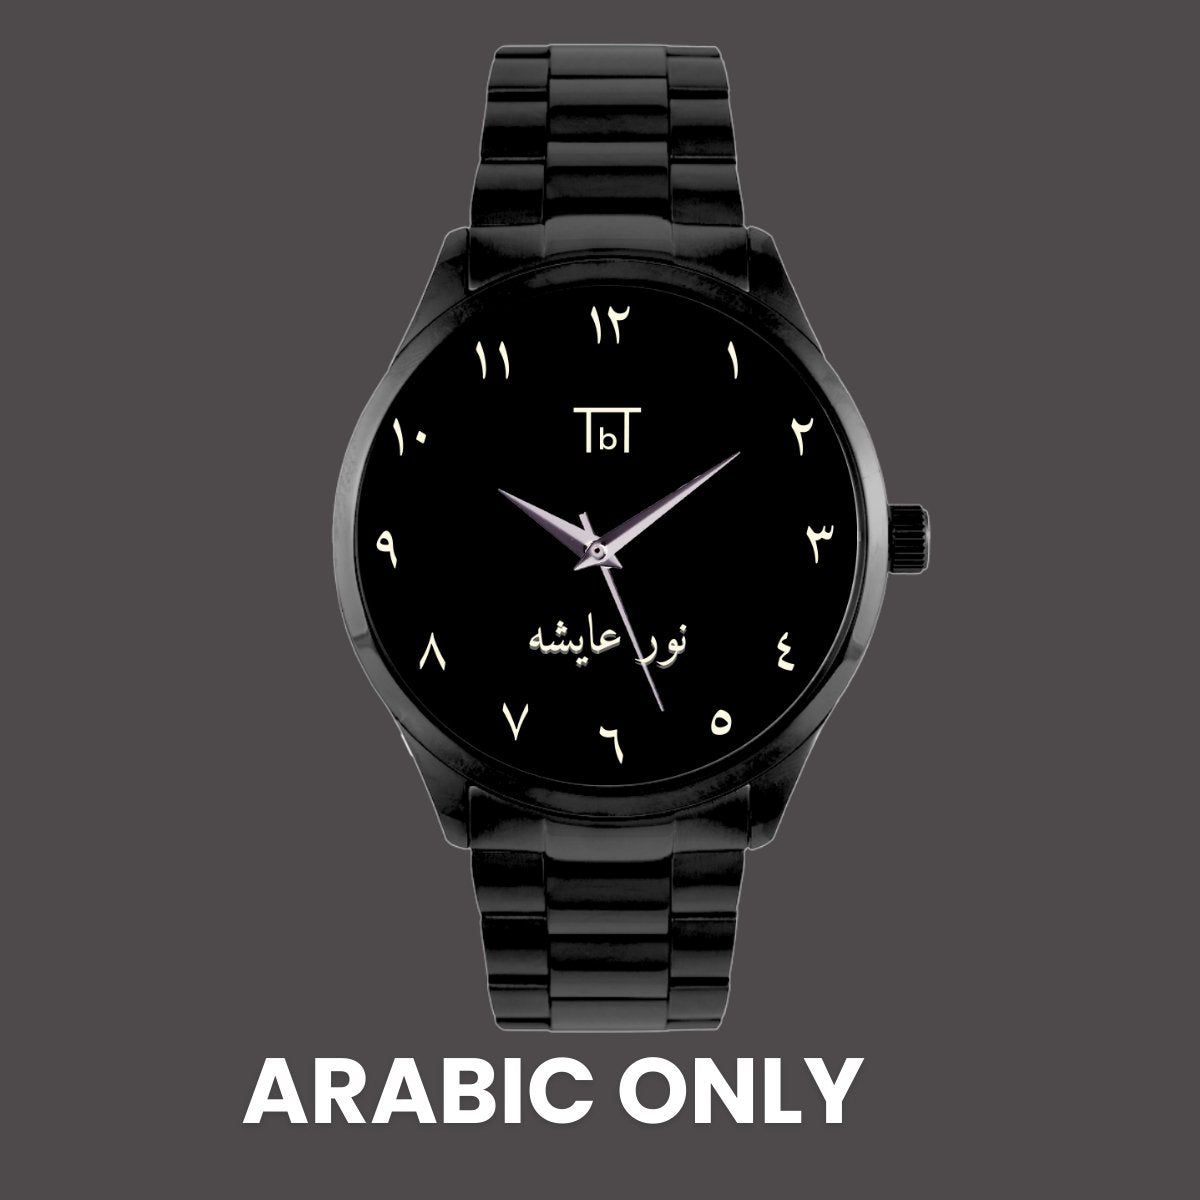 Arabic Dial Watch in Black Stainless Steel FOR HIM - TbT WatchesTbT Watches